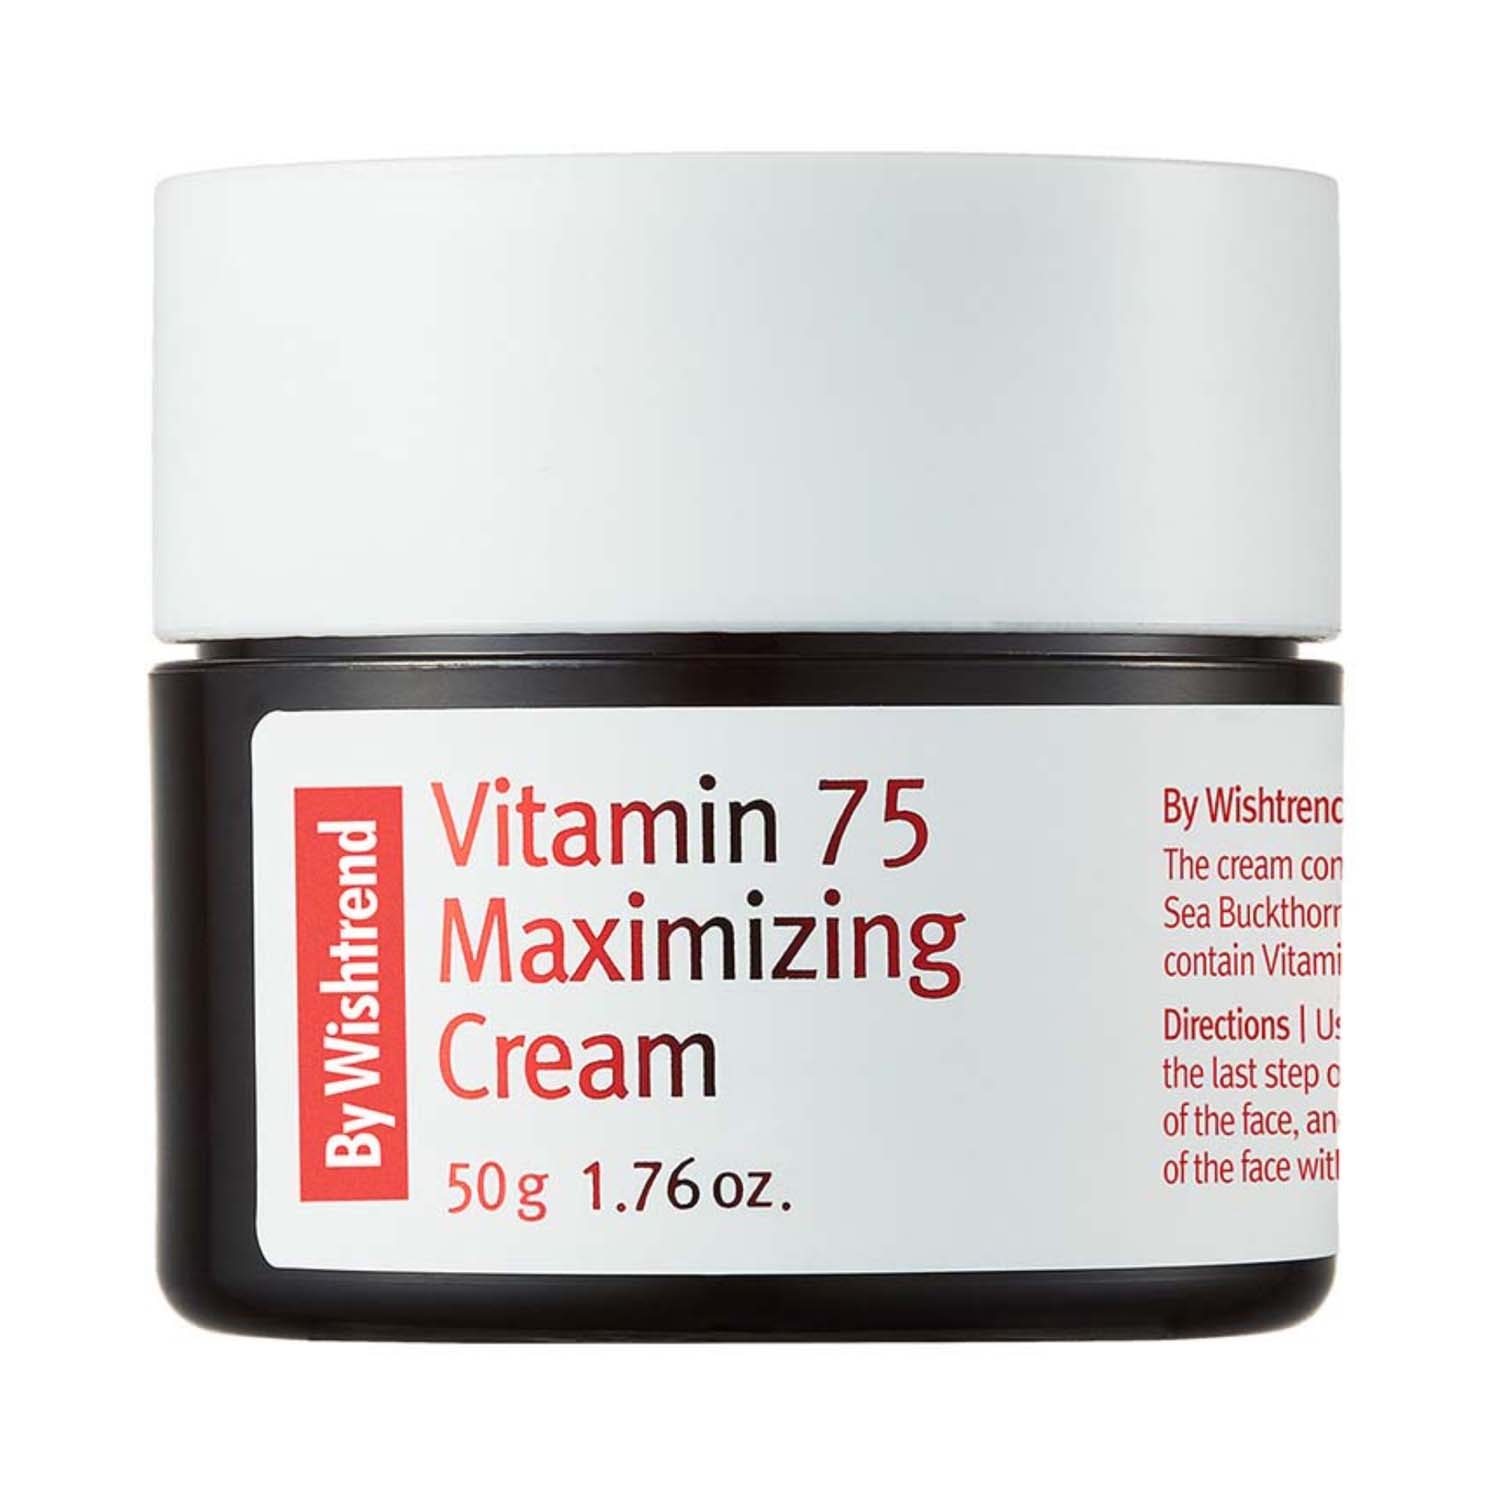 By Wishtrend | By Wishtrend Vitamin 75 Maximizing Cream (50g)